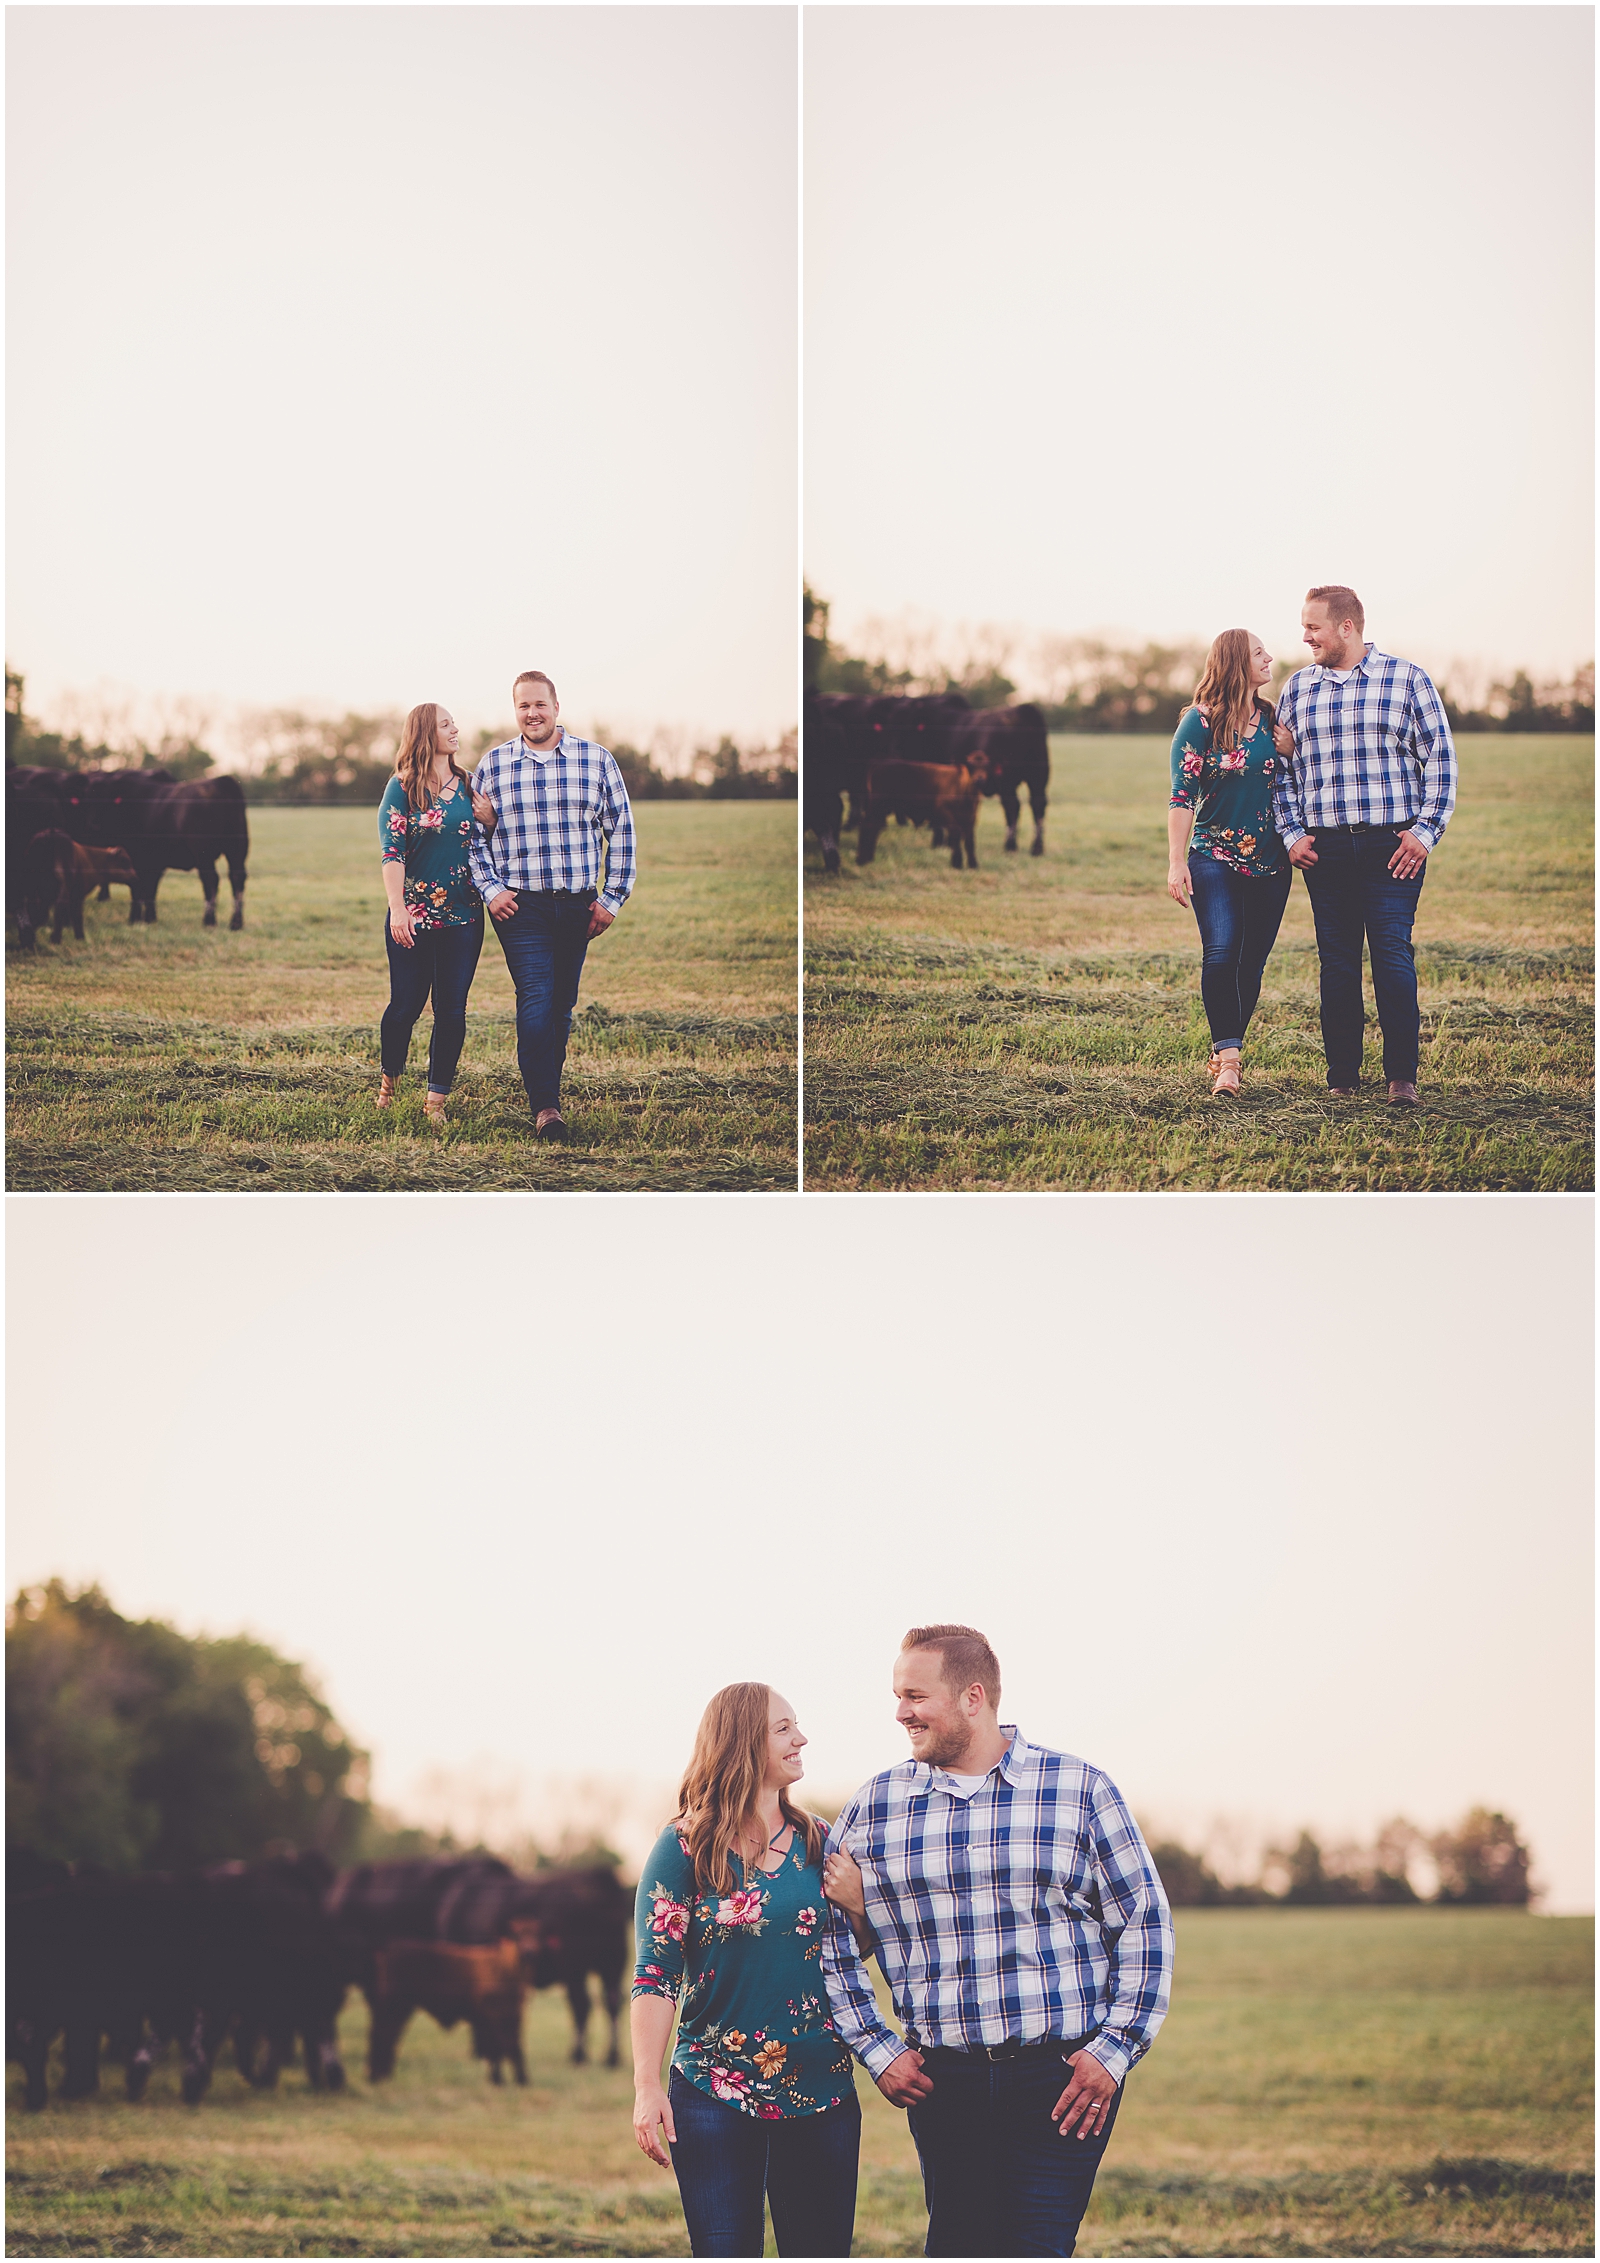 Mackenzie and Greg's Iroquois County farm anniversary session in Cissna Park, Illinois with Chicagoland wedding photographer Kara Evans Photographer.